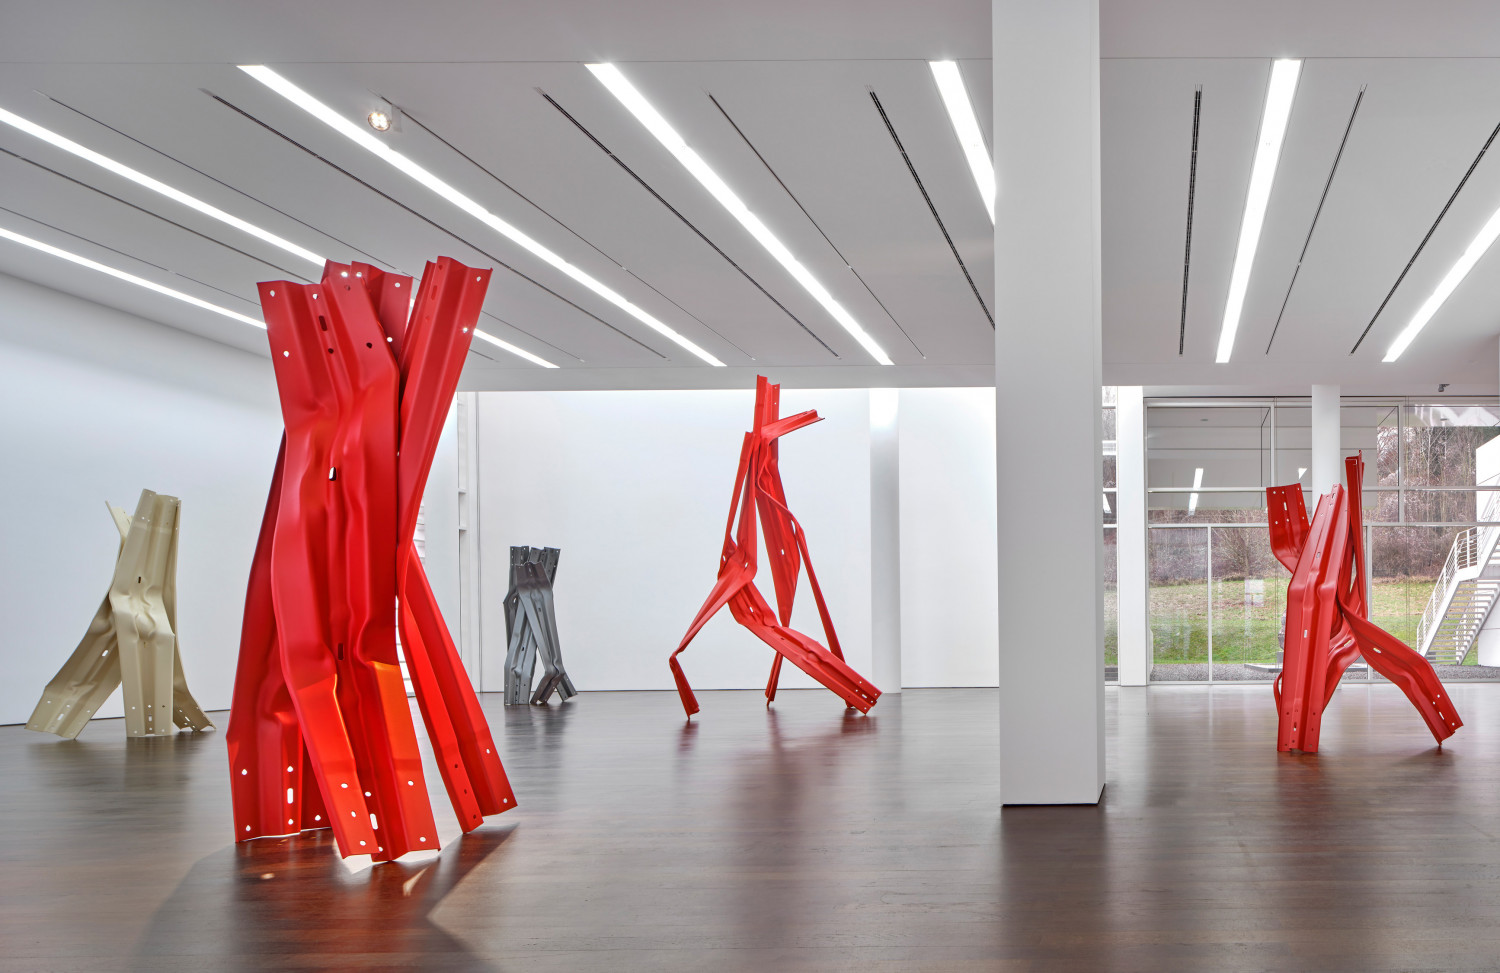 Bettina Pousttchi, ‘Fluidity, Arp Museum’, Installation view, 2022